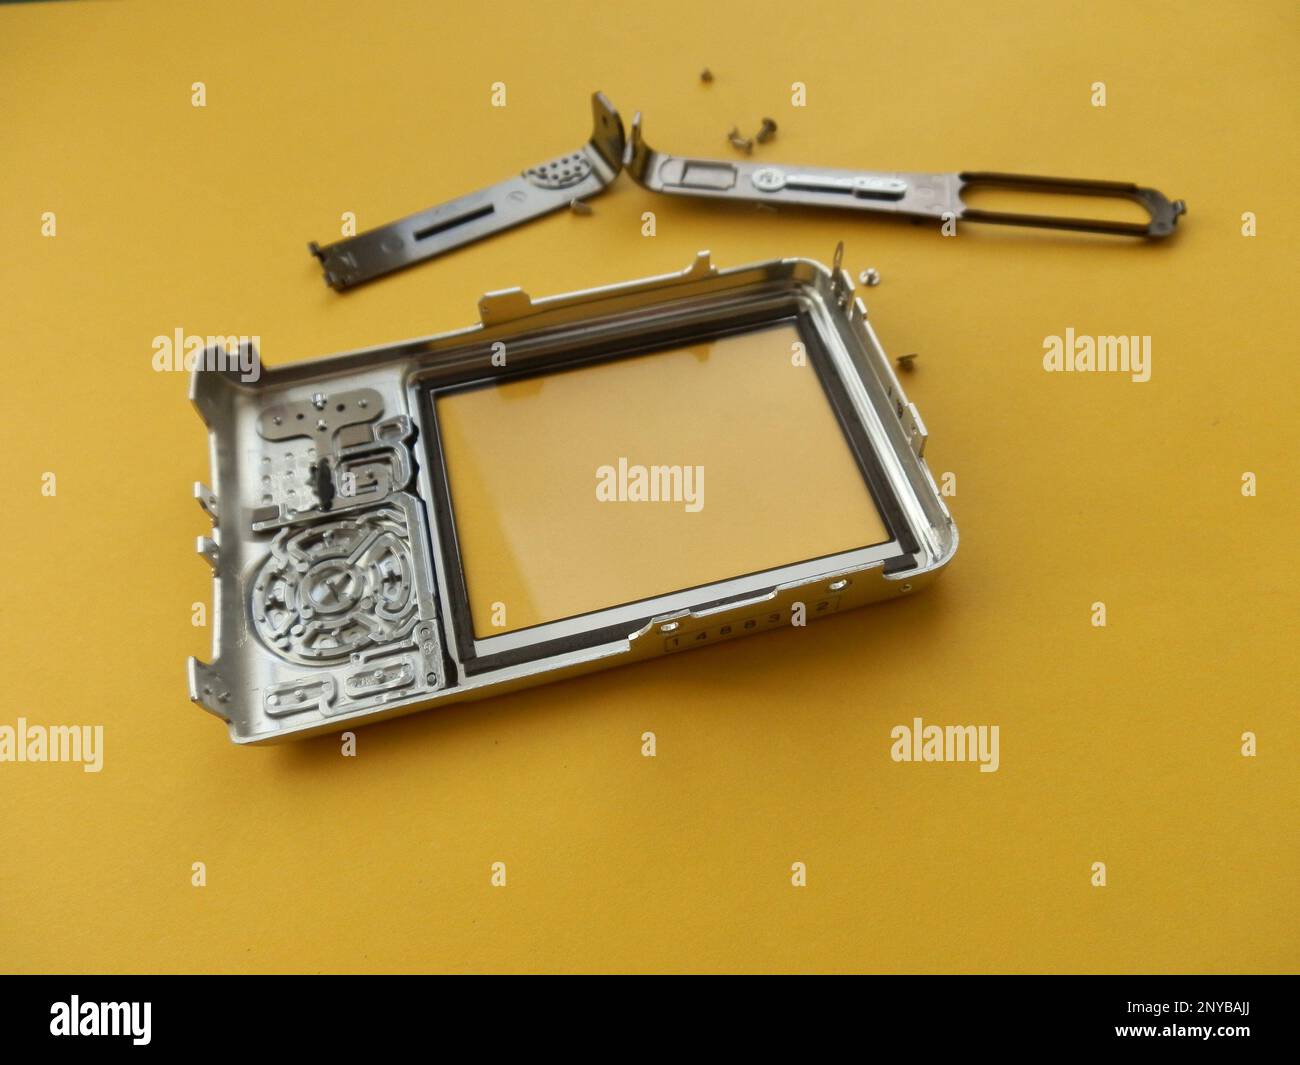 Repair and disassembly of a the pocket digital camera. Stock Photo